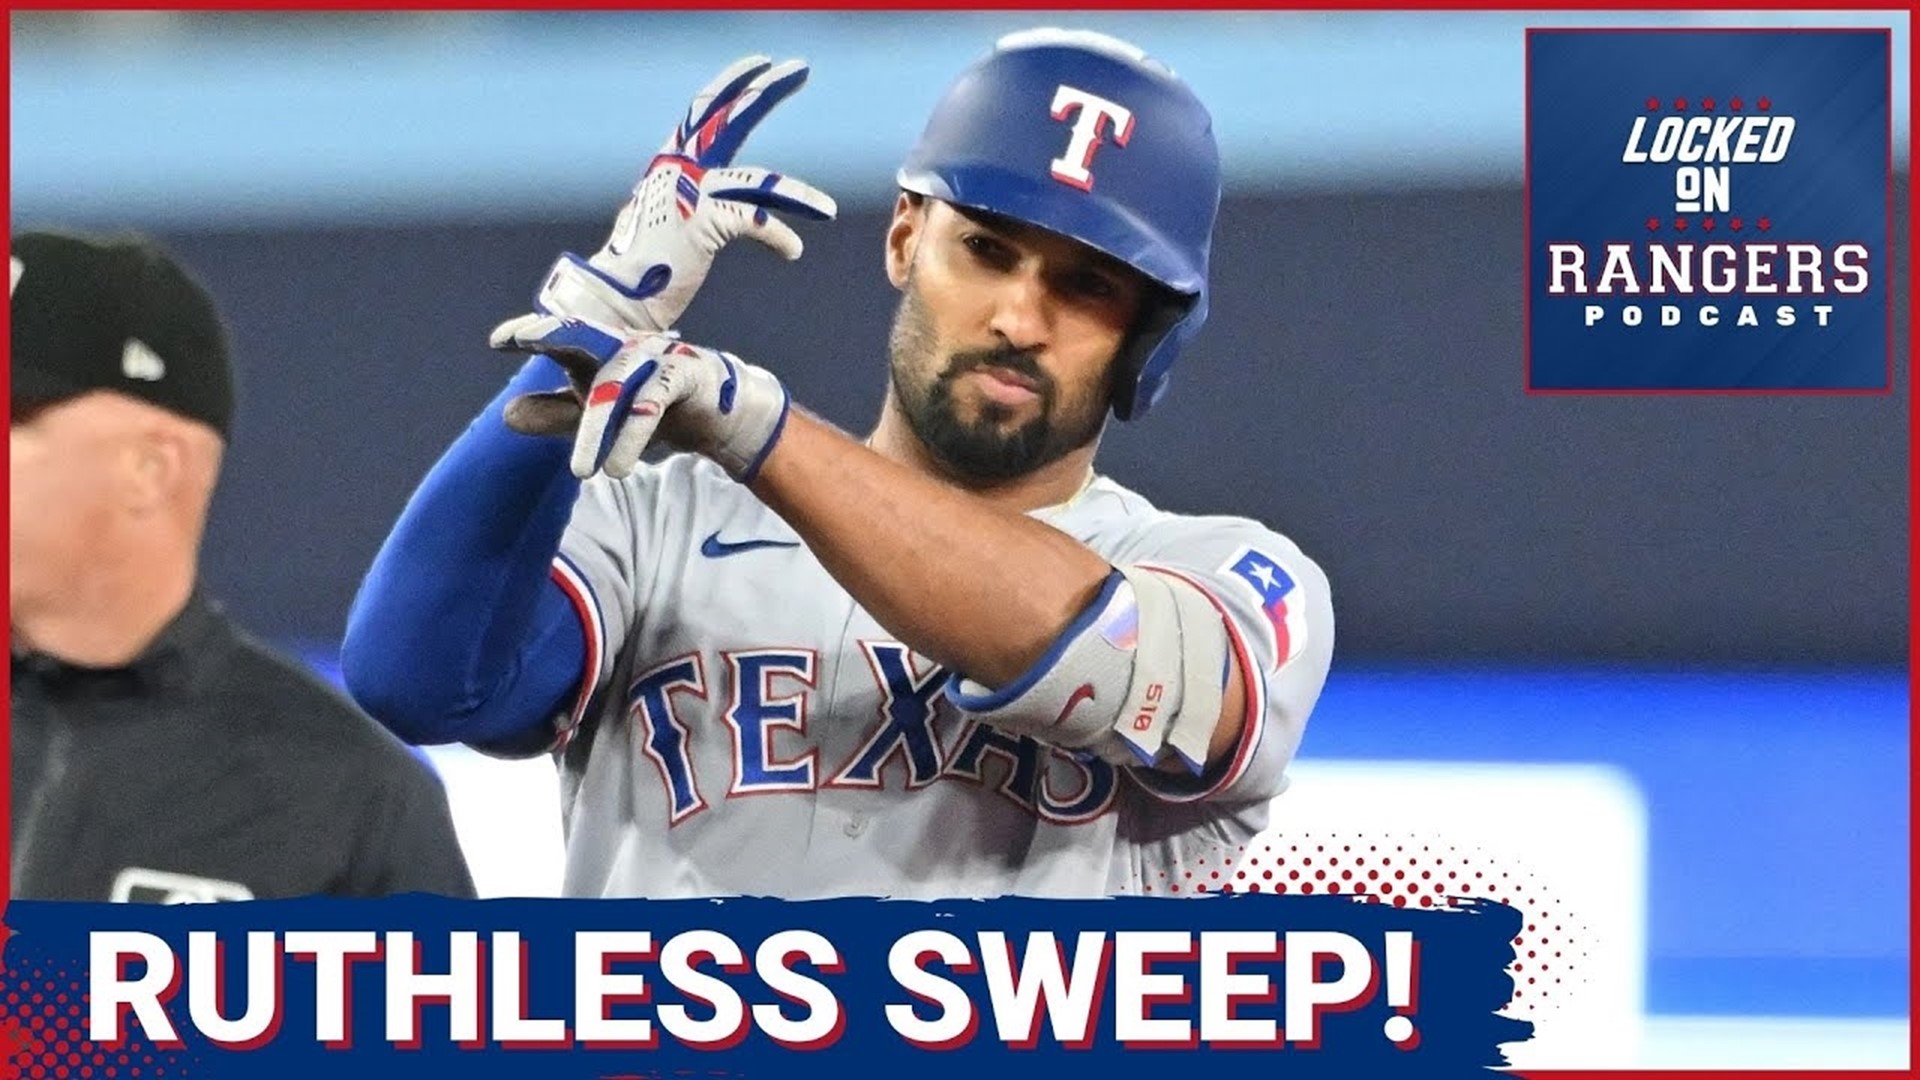 The Texas Rangers swept the Toronto Blue Jays in a crucial four-game series with Corey Seager, Nathaniel Lowe and Jonah Heim doing damage against Kevin Gausman.